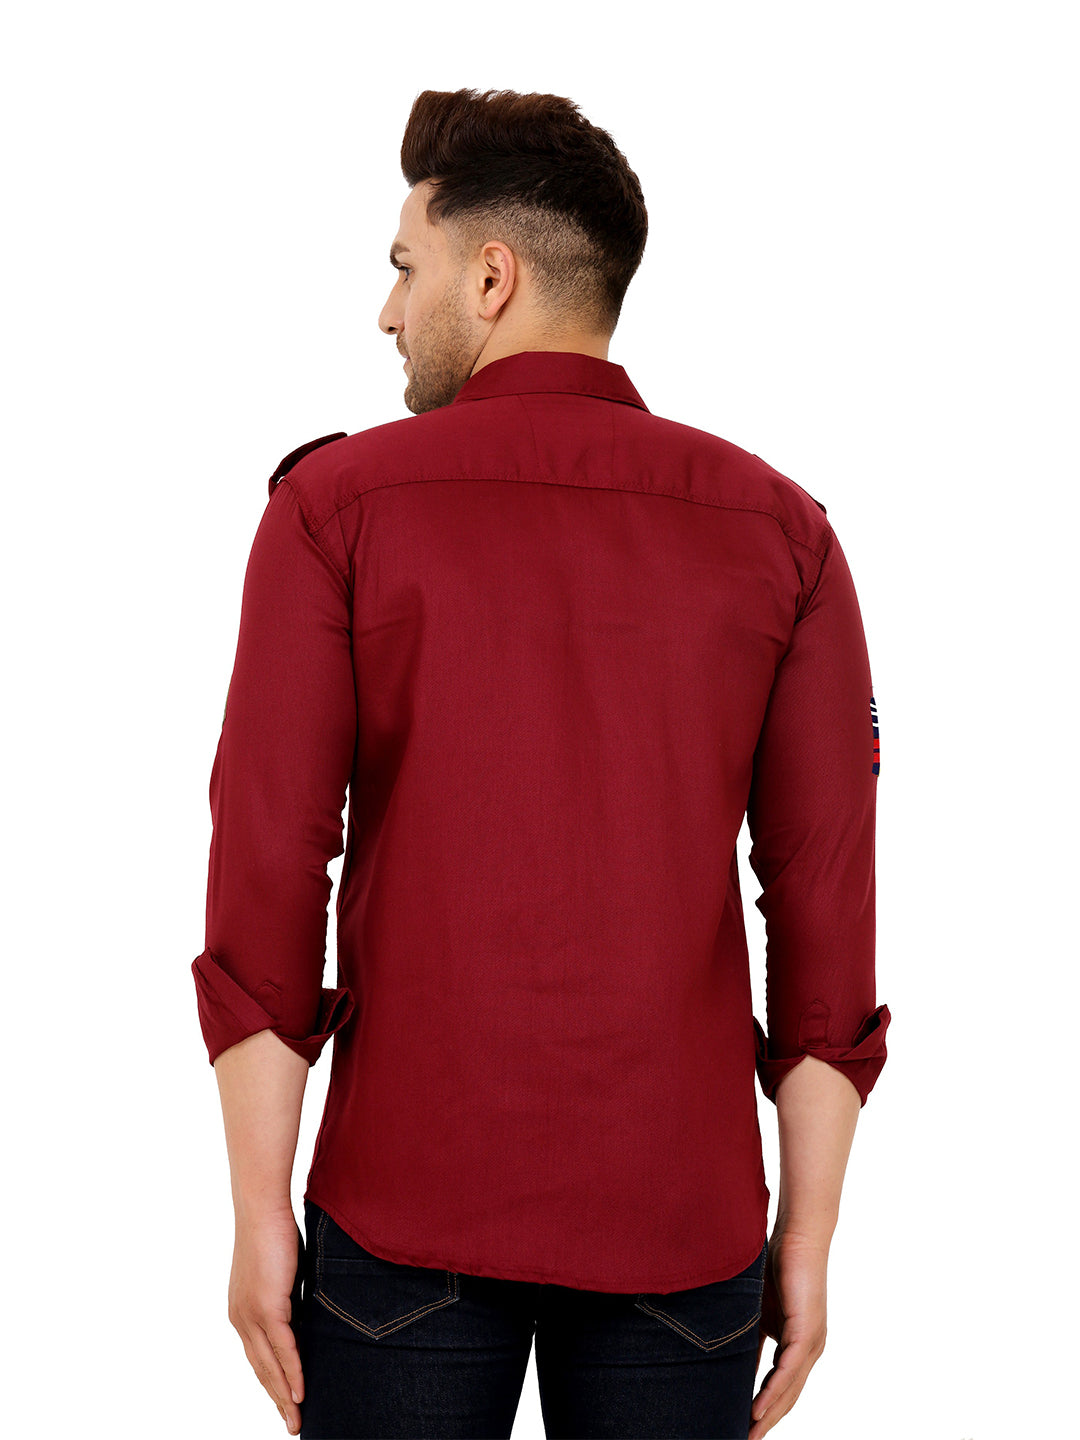 Men's Stylish Cotton Casual Shirt | Affordable and Trendy Fashion ( Maroon )